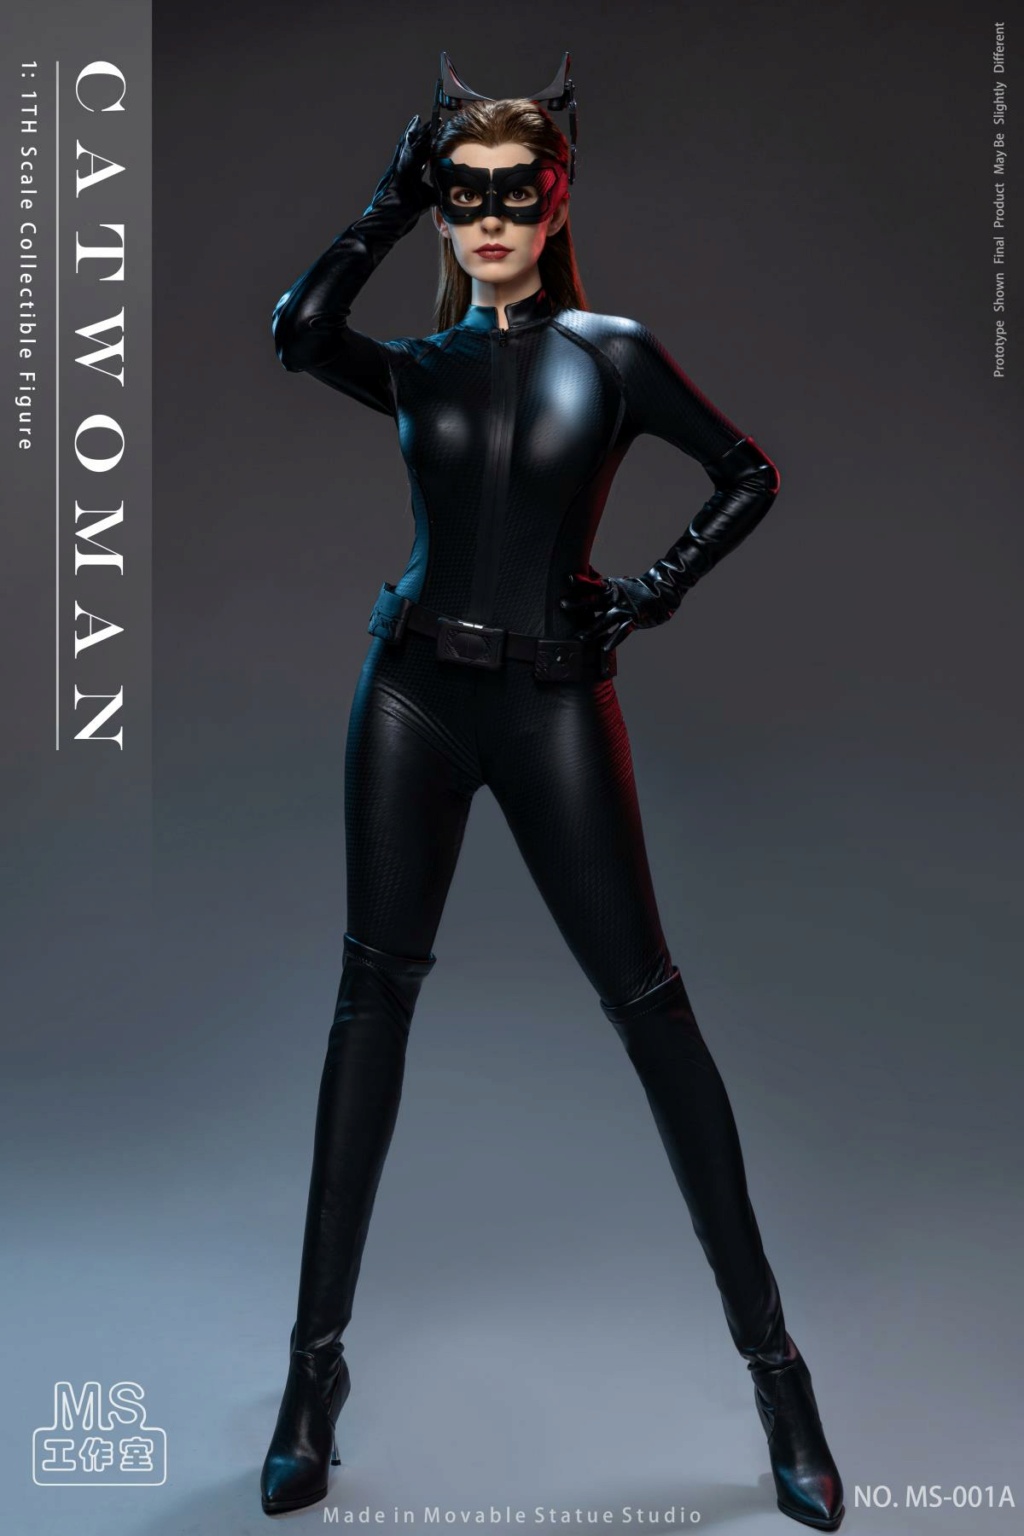 movie-based - NEW PRODUCT: MS Studio: Catwoman Movie Version 1/1 Proportion Catwoman Cherished Movable Figure “ Grand ” Age MS-001A 16142